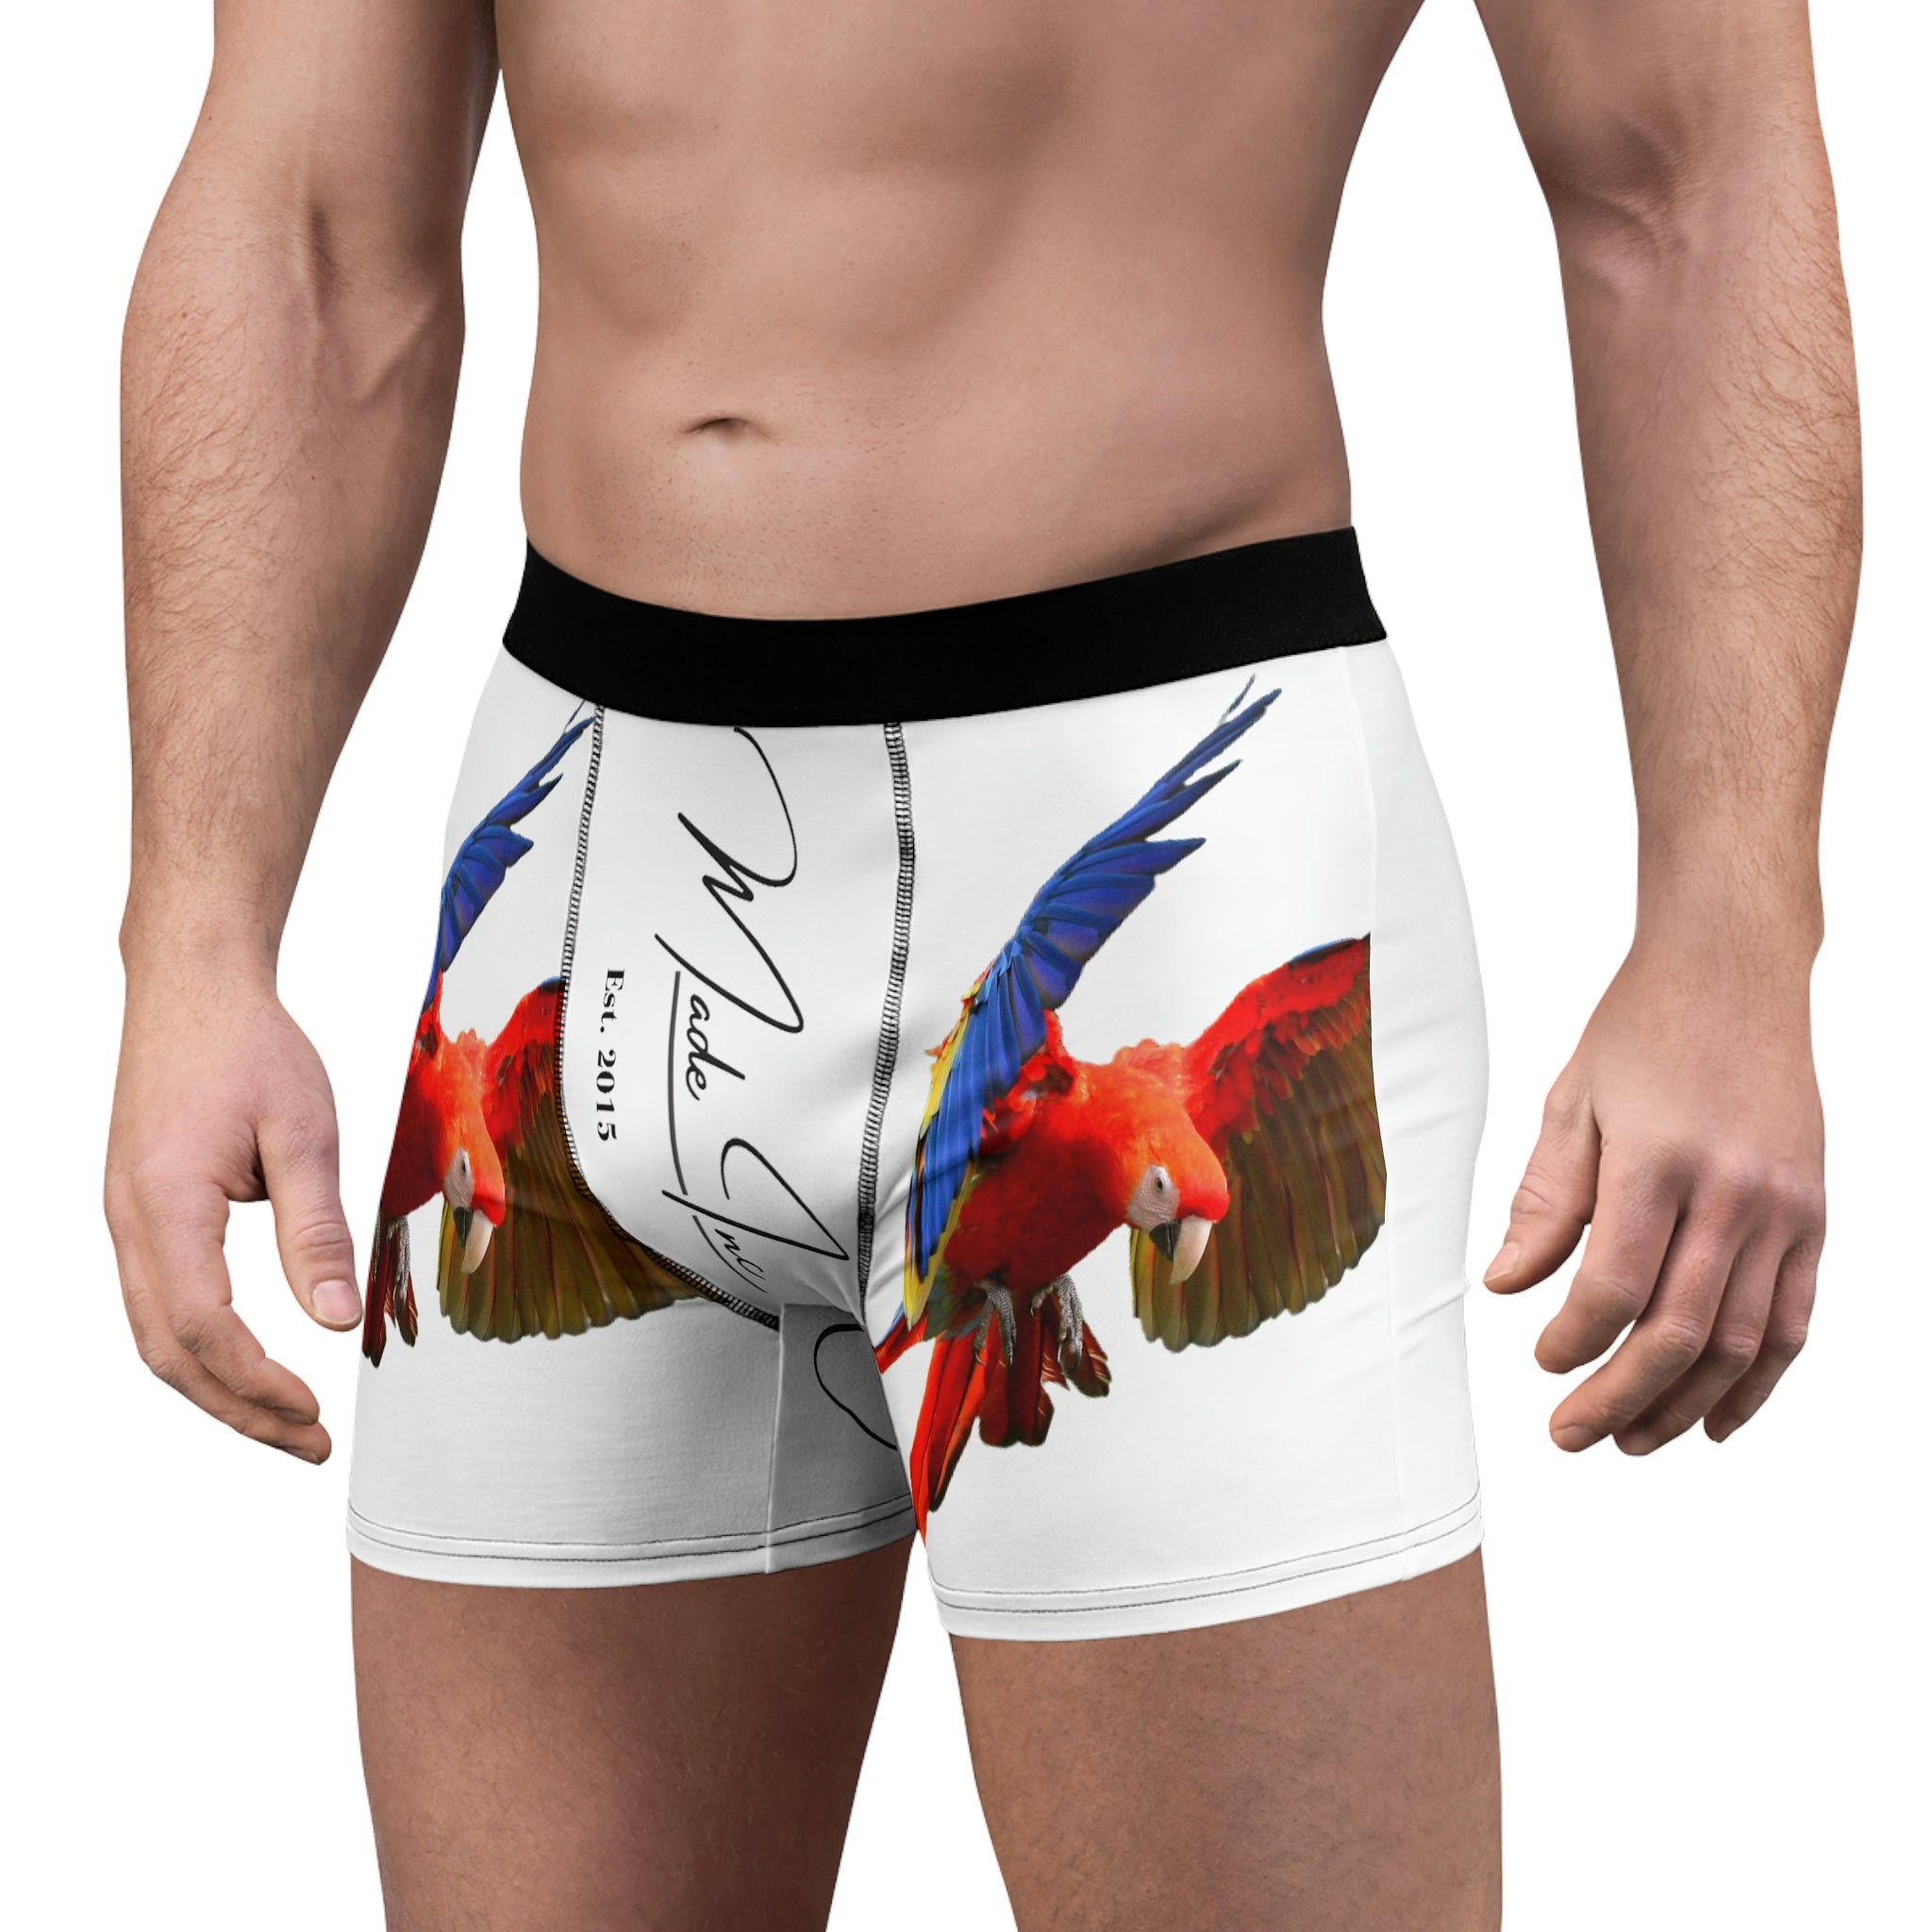 Image of luxury Scarlet Macaw Custom Men's Boxer Briefs by Made Inc, made from lightweight polyester fabric. Designed for comfort and style, perfect for everyday wear. white scarlet macow boxer briefs with black trim, black stitching and Made Inc signature. 